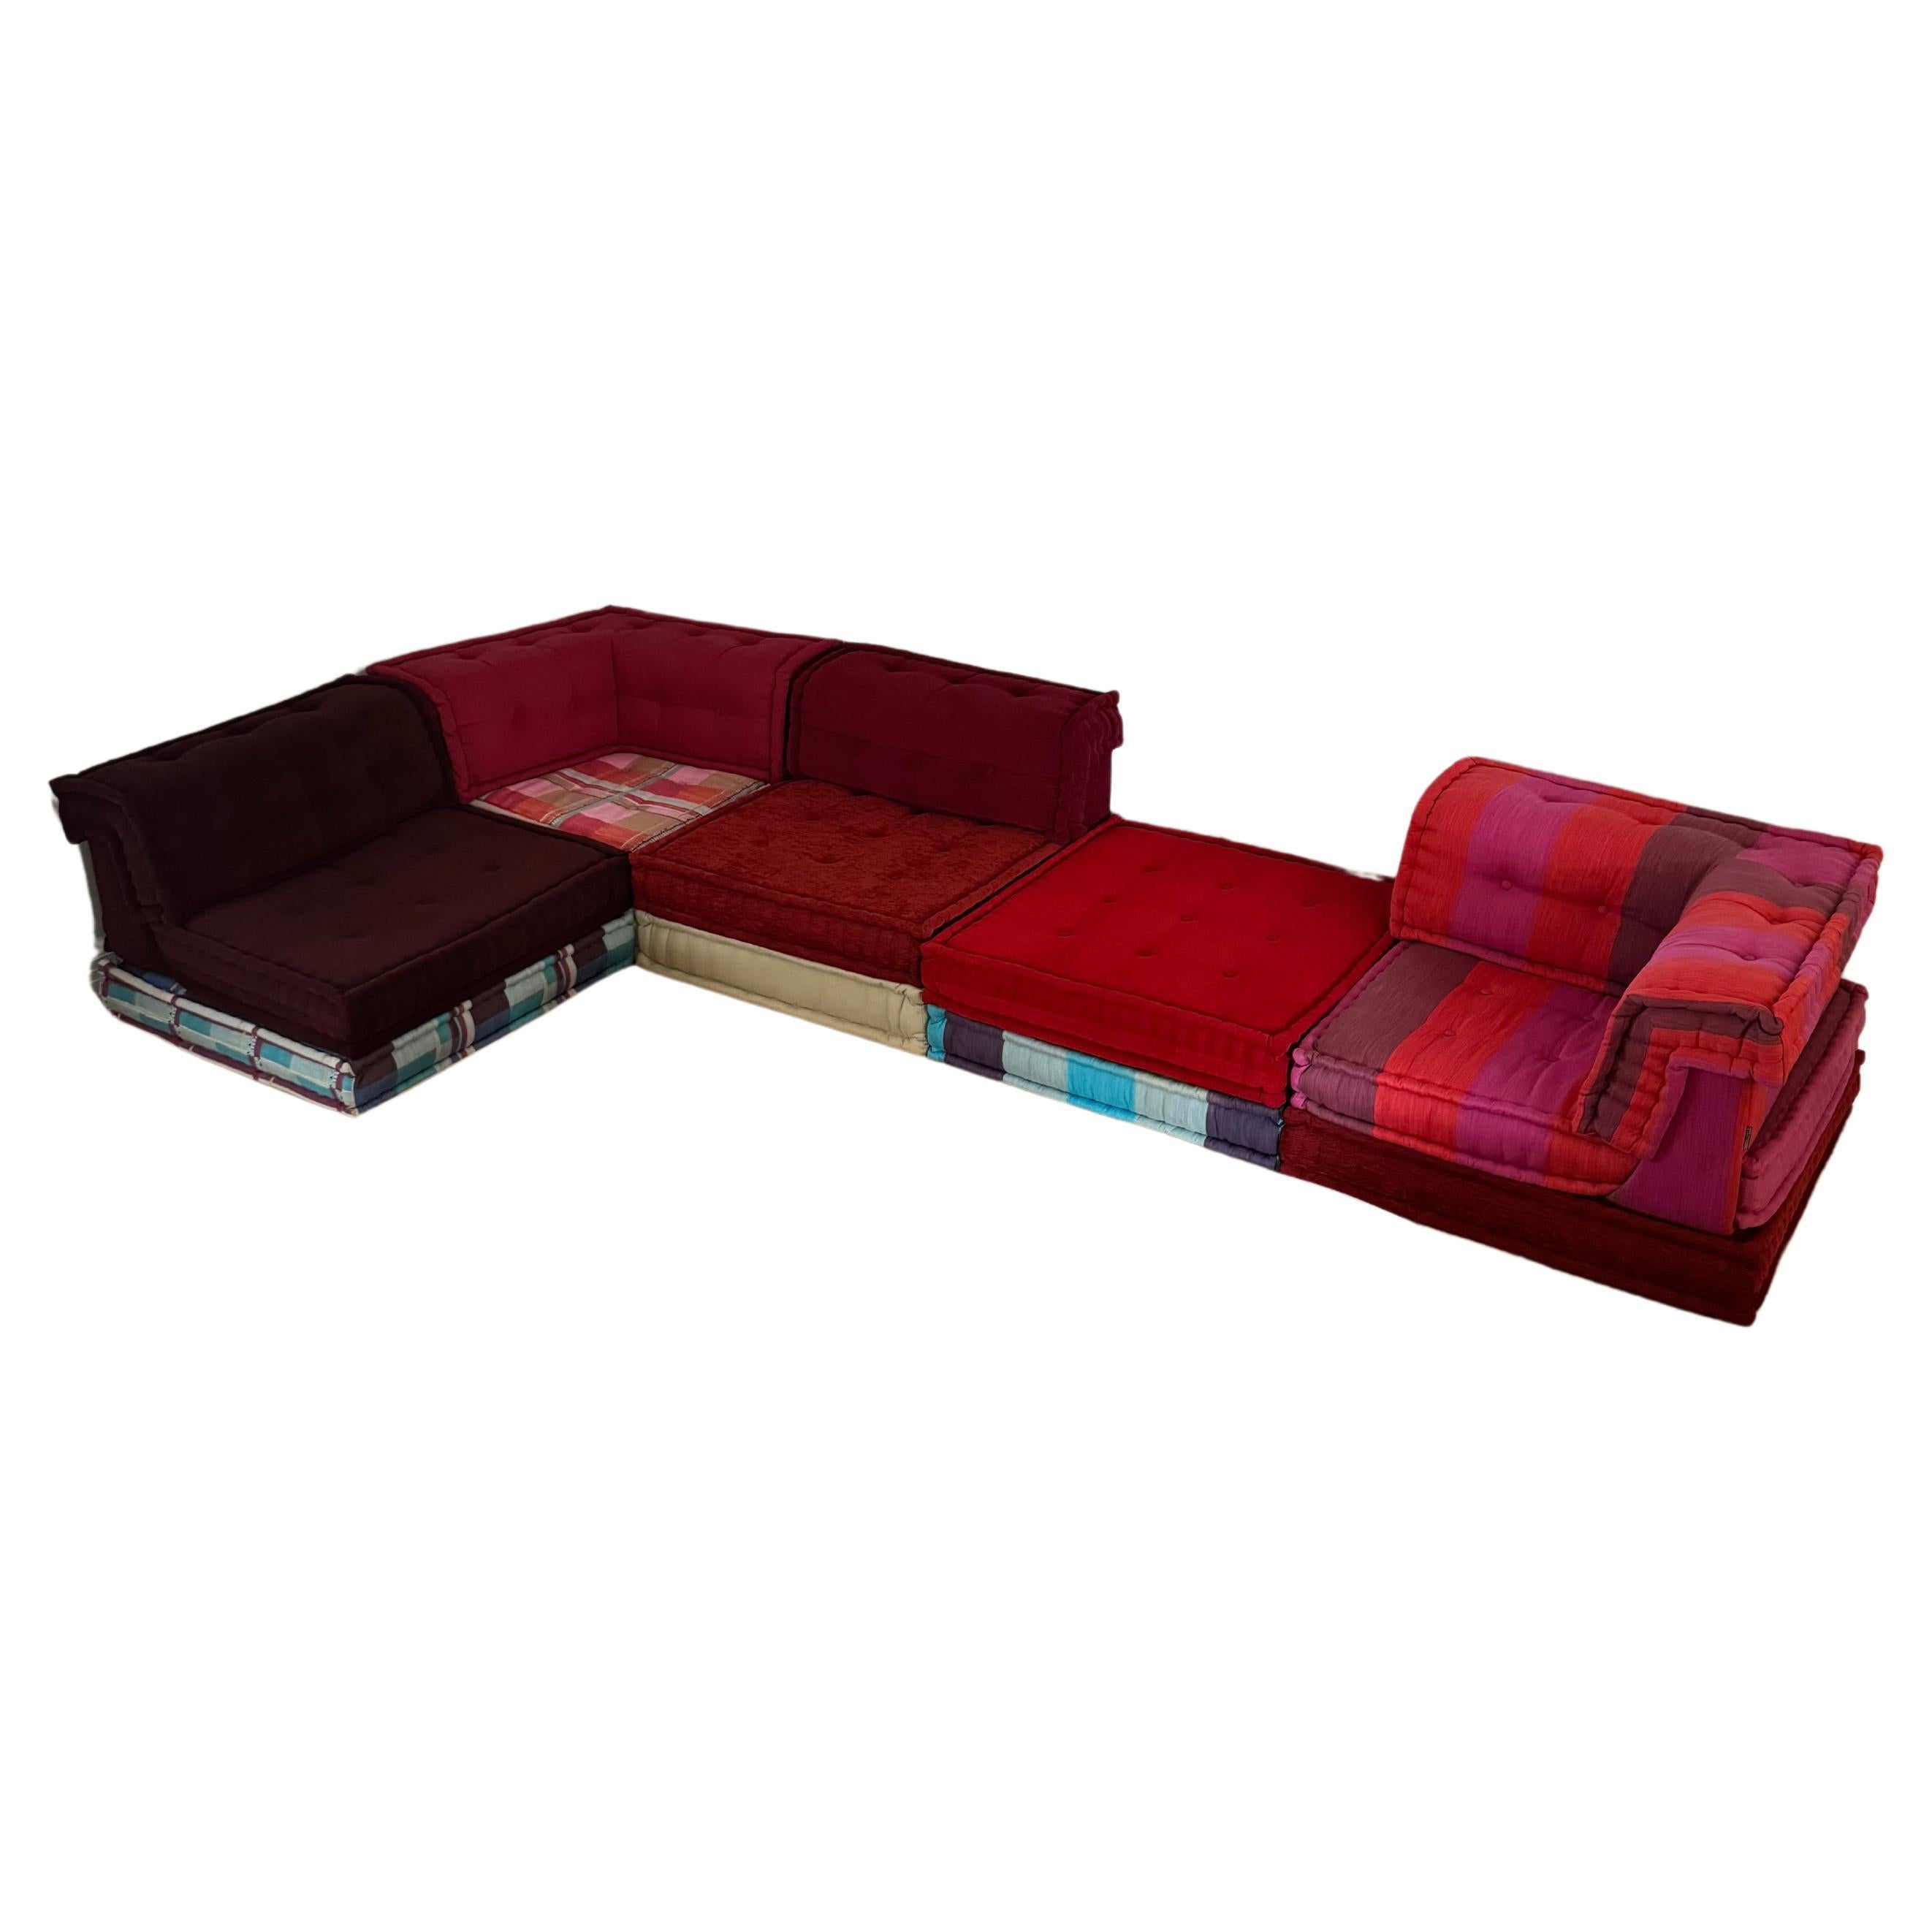 Mah Jong Sofa by Hans Hopfer for Roche Bobois. Fully modular design and stunning Missoni fabrics create a world of possibilities from a traditional sectional layout to a full conversation pit. Truly the pinnacle of high-fashion furniture. This set